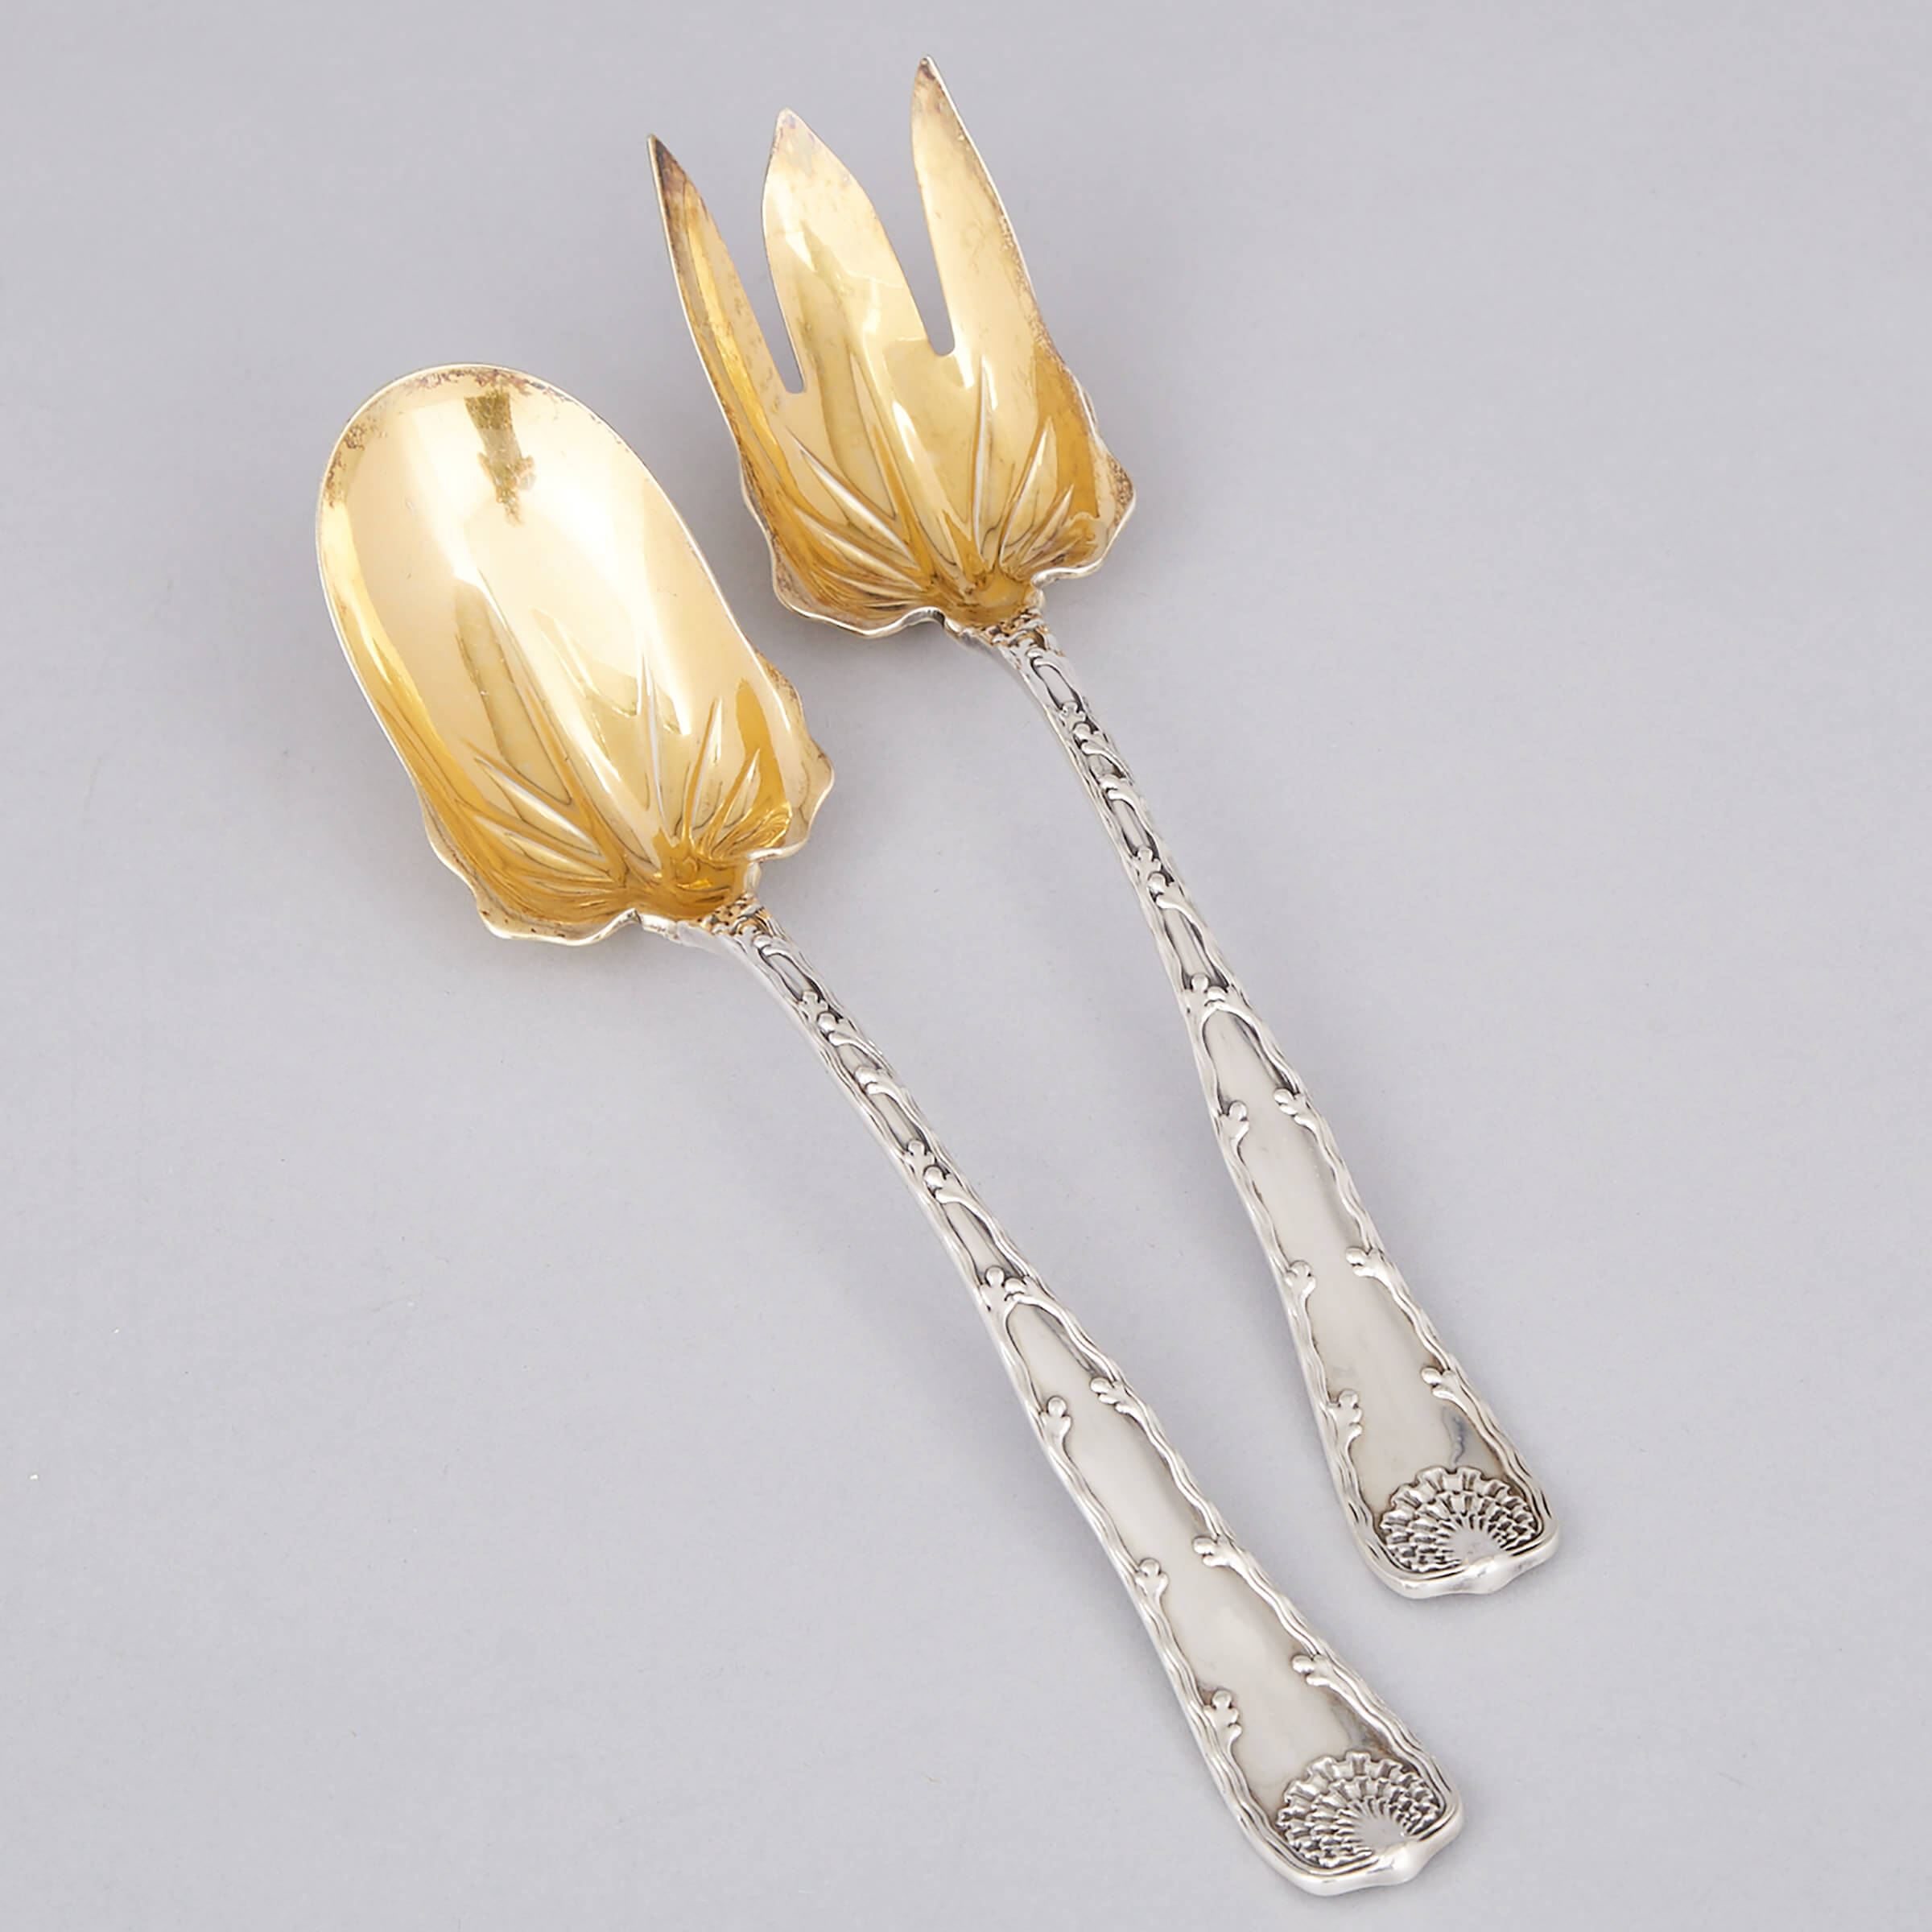 American Silver ‘Wave Edge’ Pattern Serving Spoon and Fork, Tiffany & Co., New York, N.Y., 20th century 